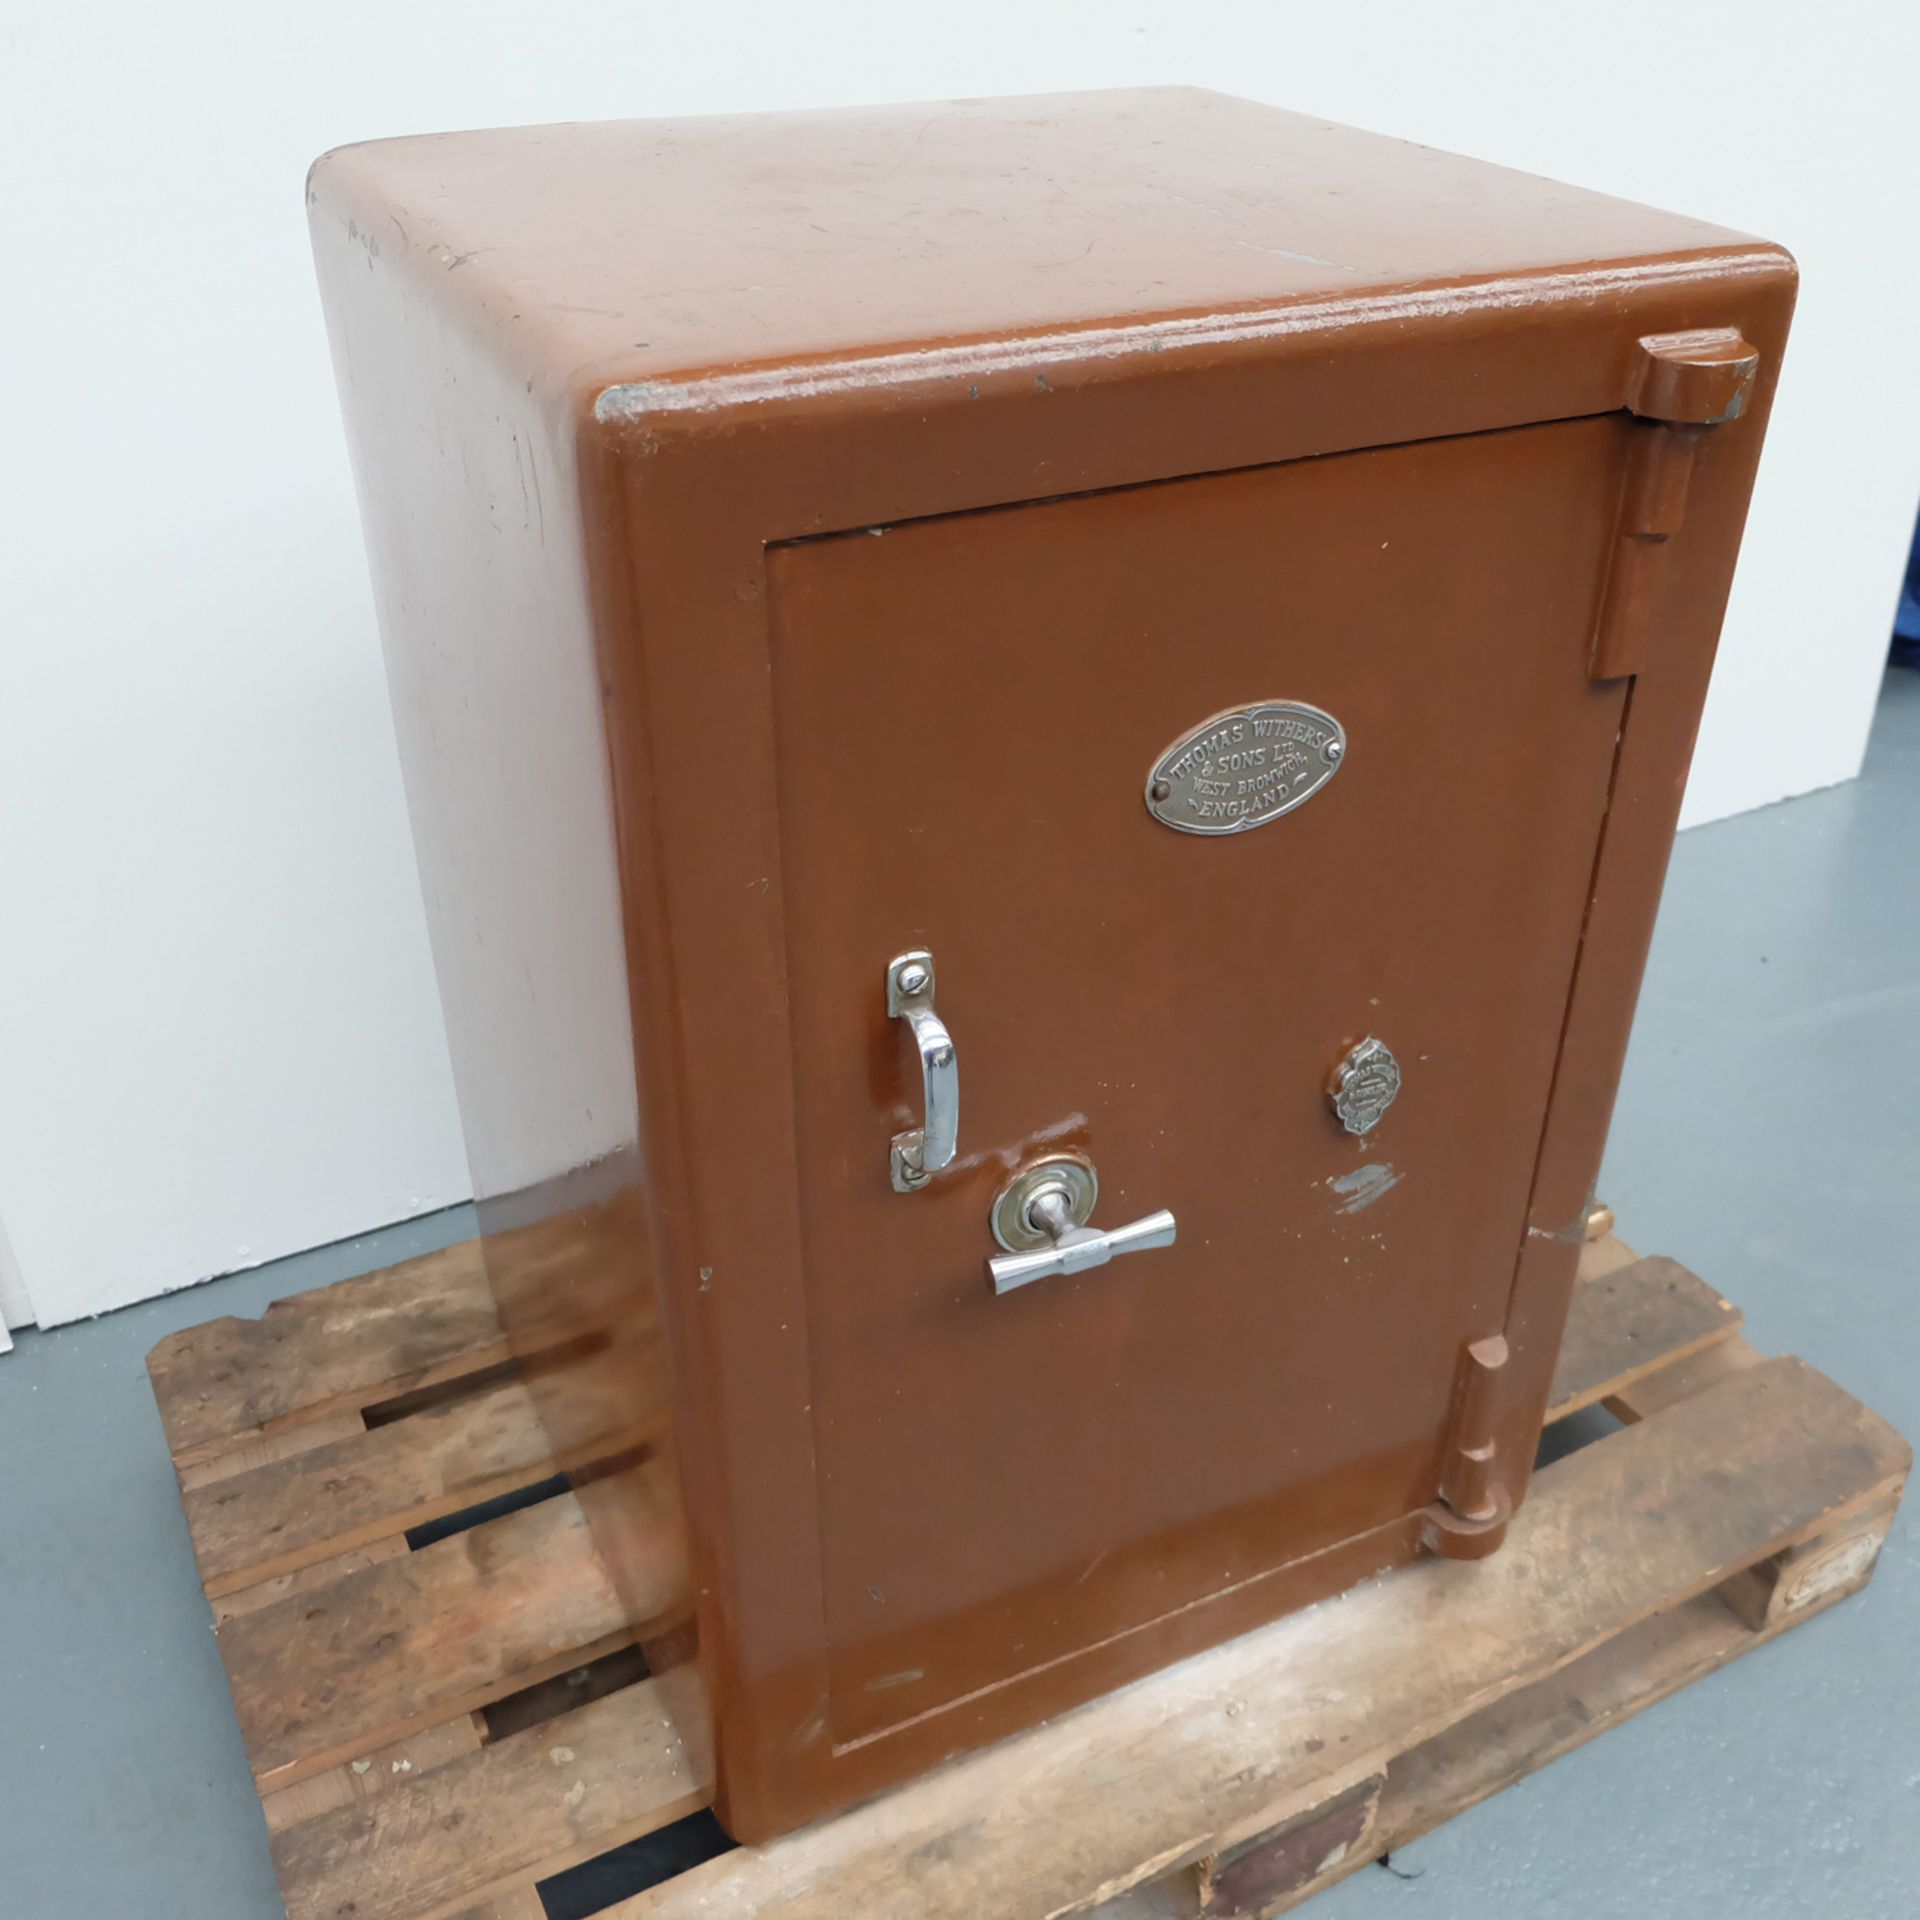 Thomas Withers & Sons ltd Safe. - Image 3 of 4